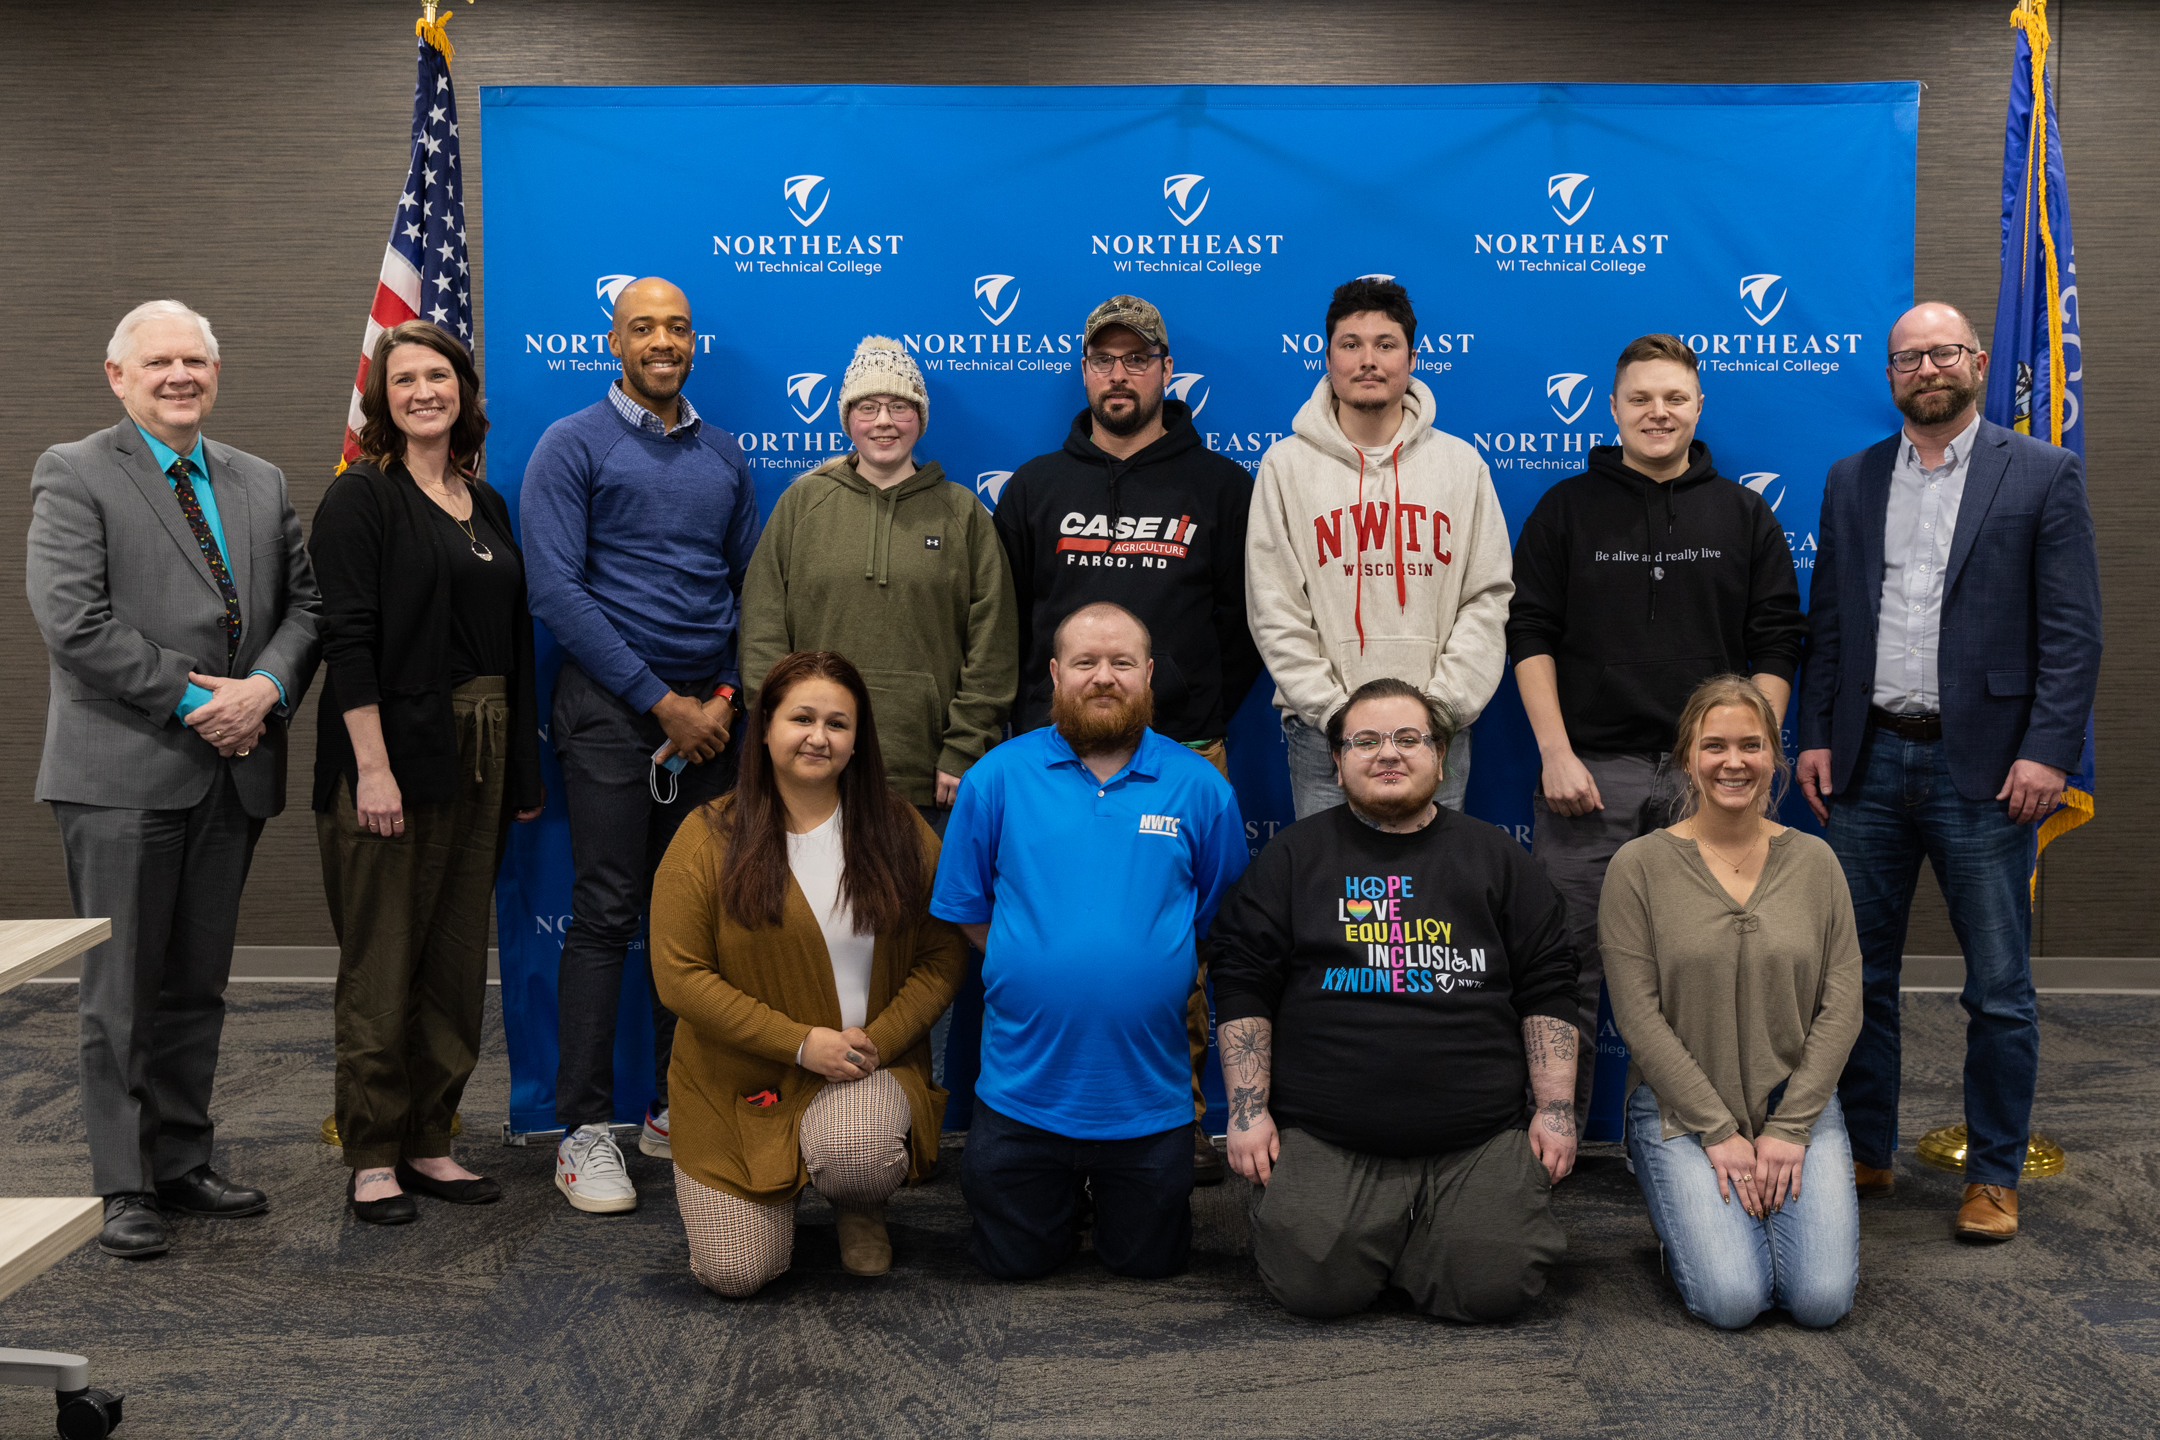 Lt. Gov. Mandela Barnes and Mayor Genrich visit NWTC to discuss the benefits of a two-year education and the role it plays to meet workforce demands within the community.